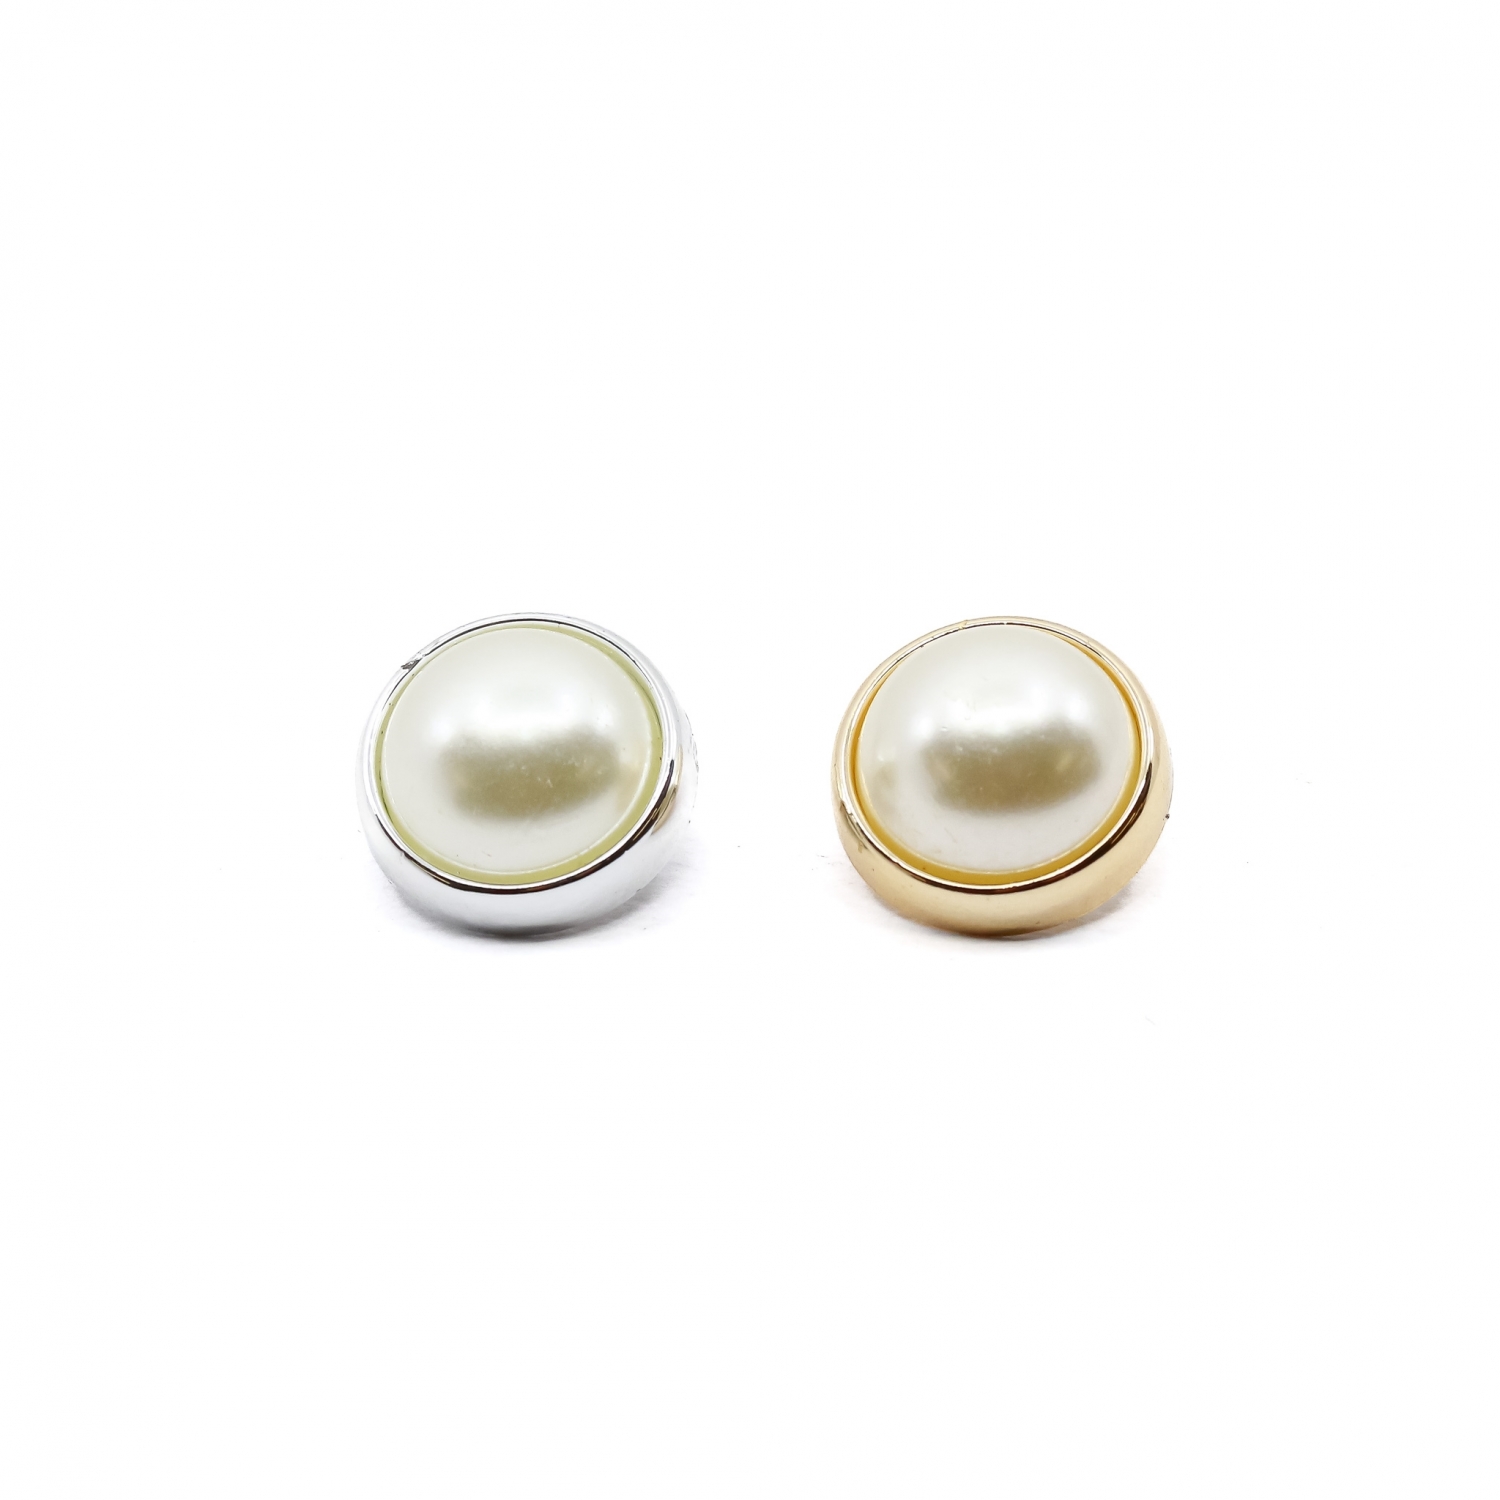 Pearl Shank Buttons, 18 mm (100 pcs/pack) Code: 6311/28